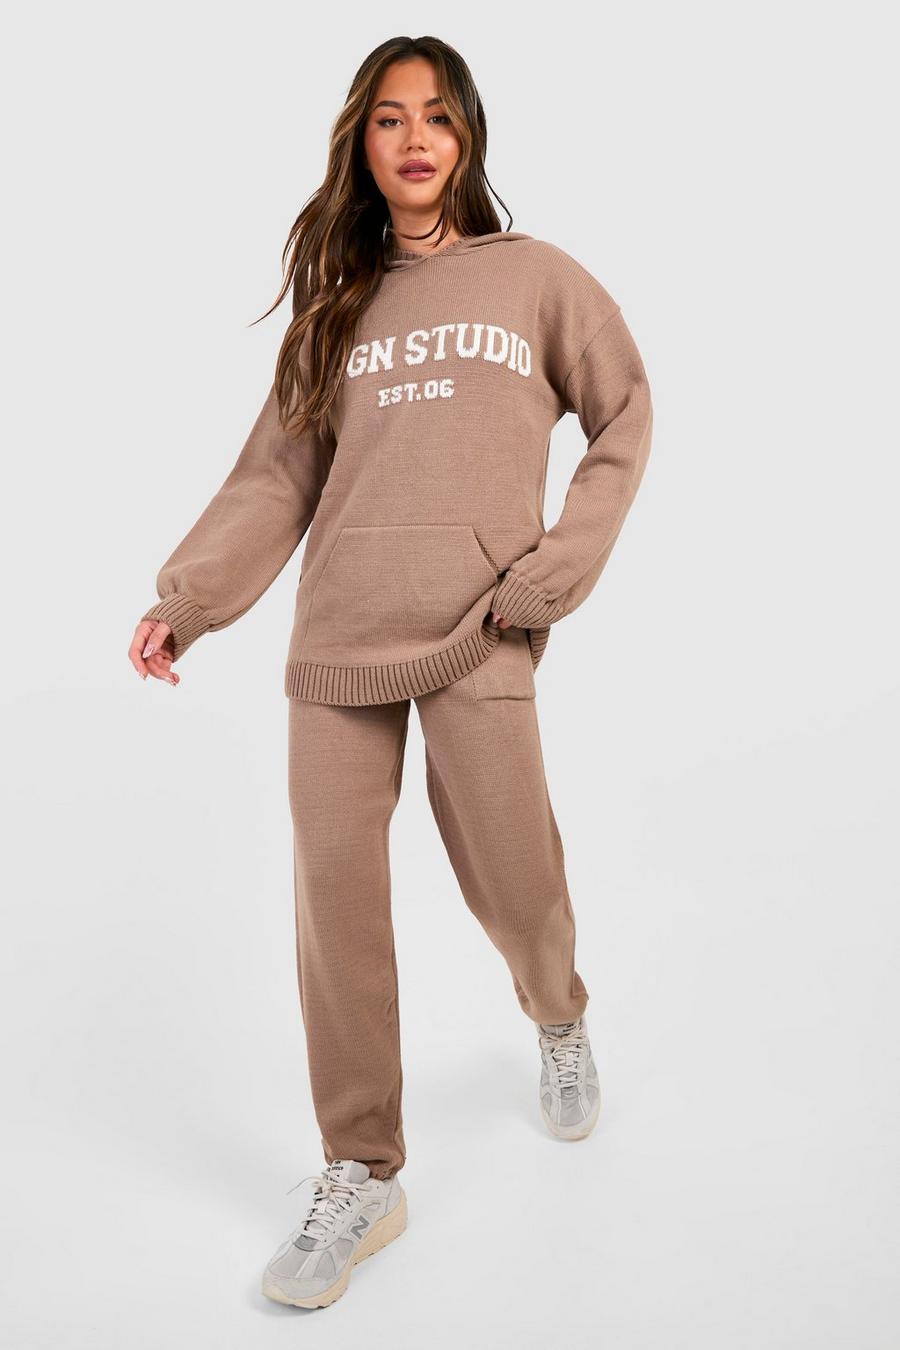 Taupe Dsgn Studio Oversized Hoody And Track Pants Set image number 1